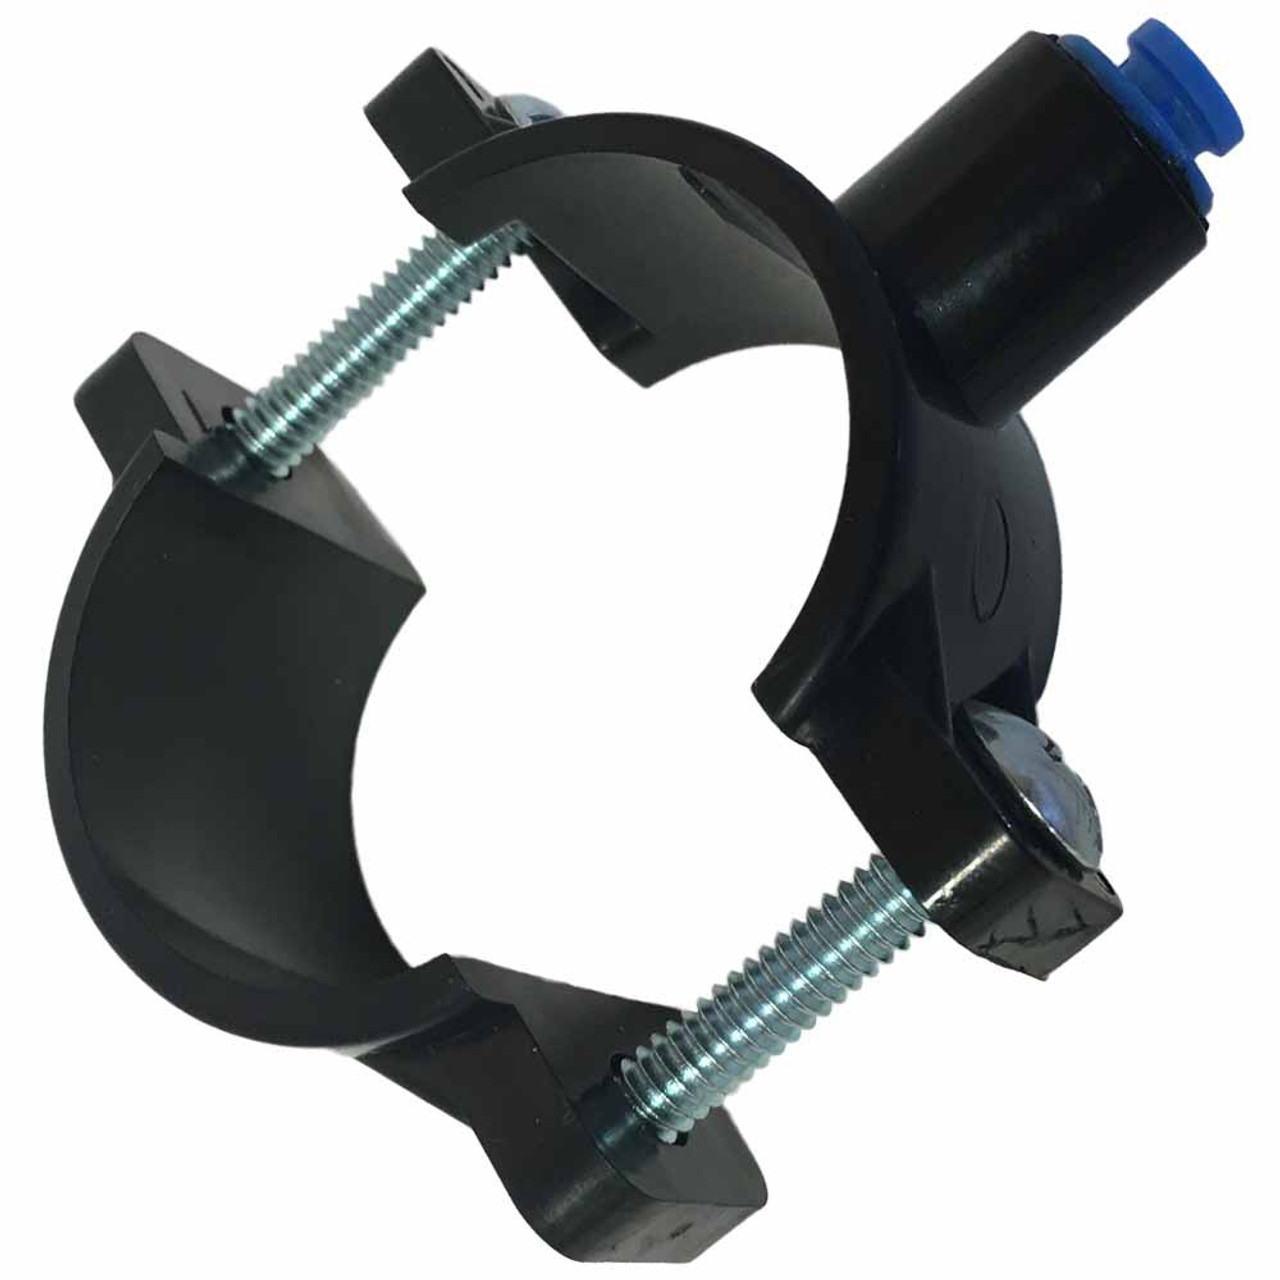 w/ Compression Nut 1/4" Drain Saddle Valve Clamp for RO Systems 